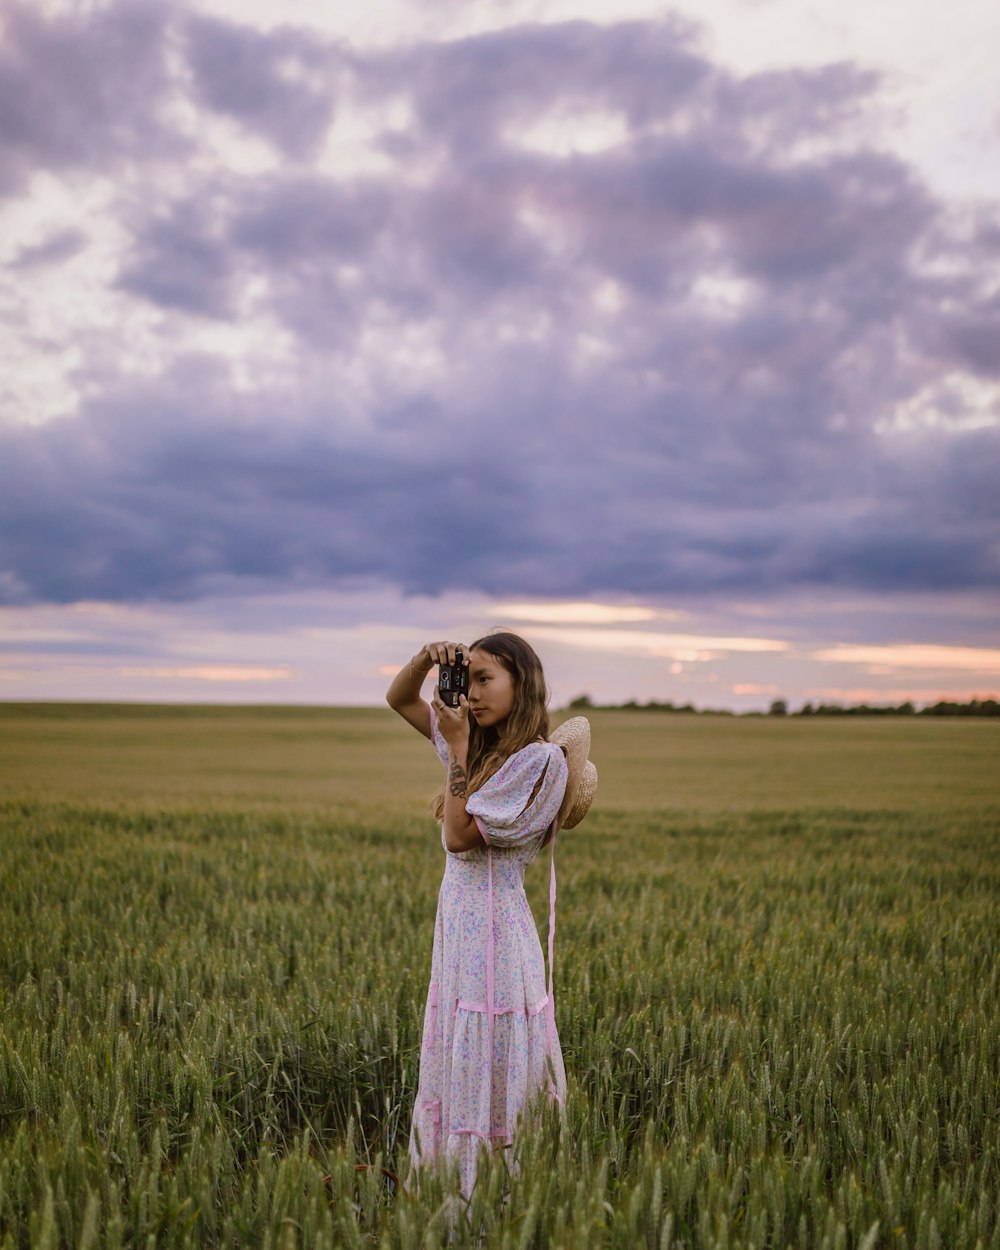 woman in white and pink dress standing on green grass field under cloudy sky during daytime